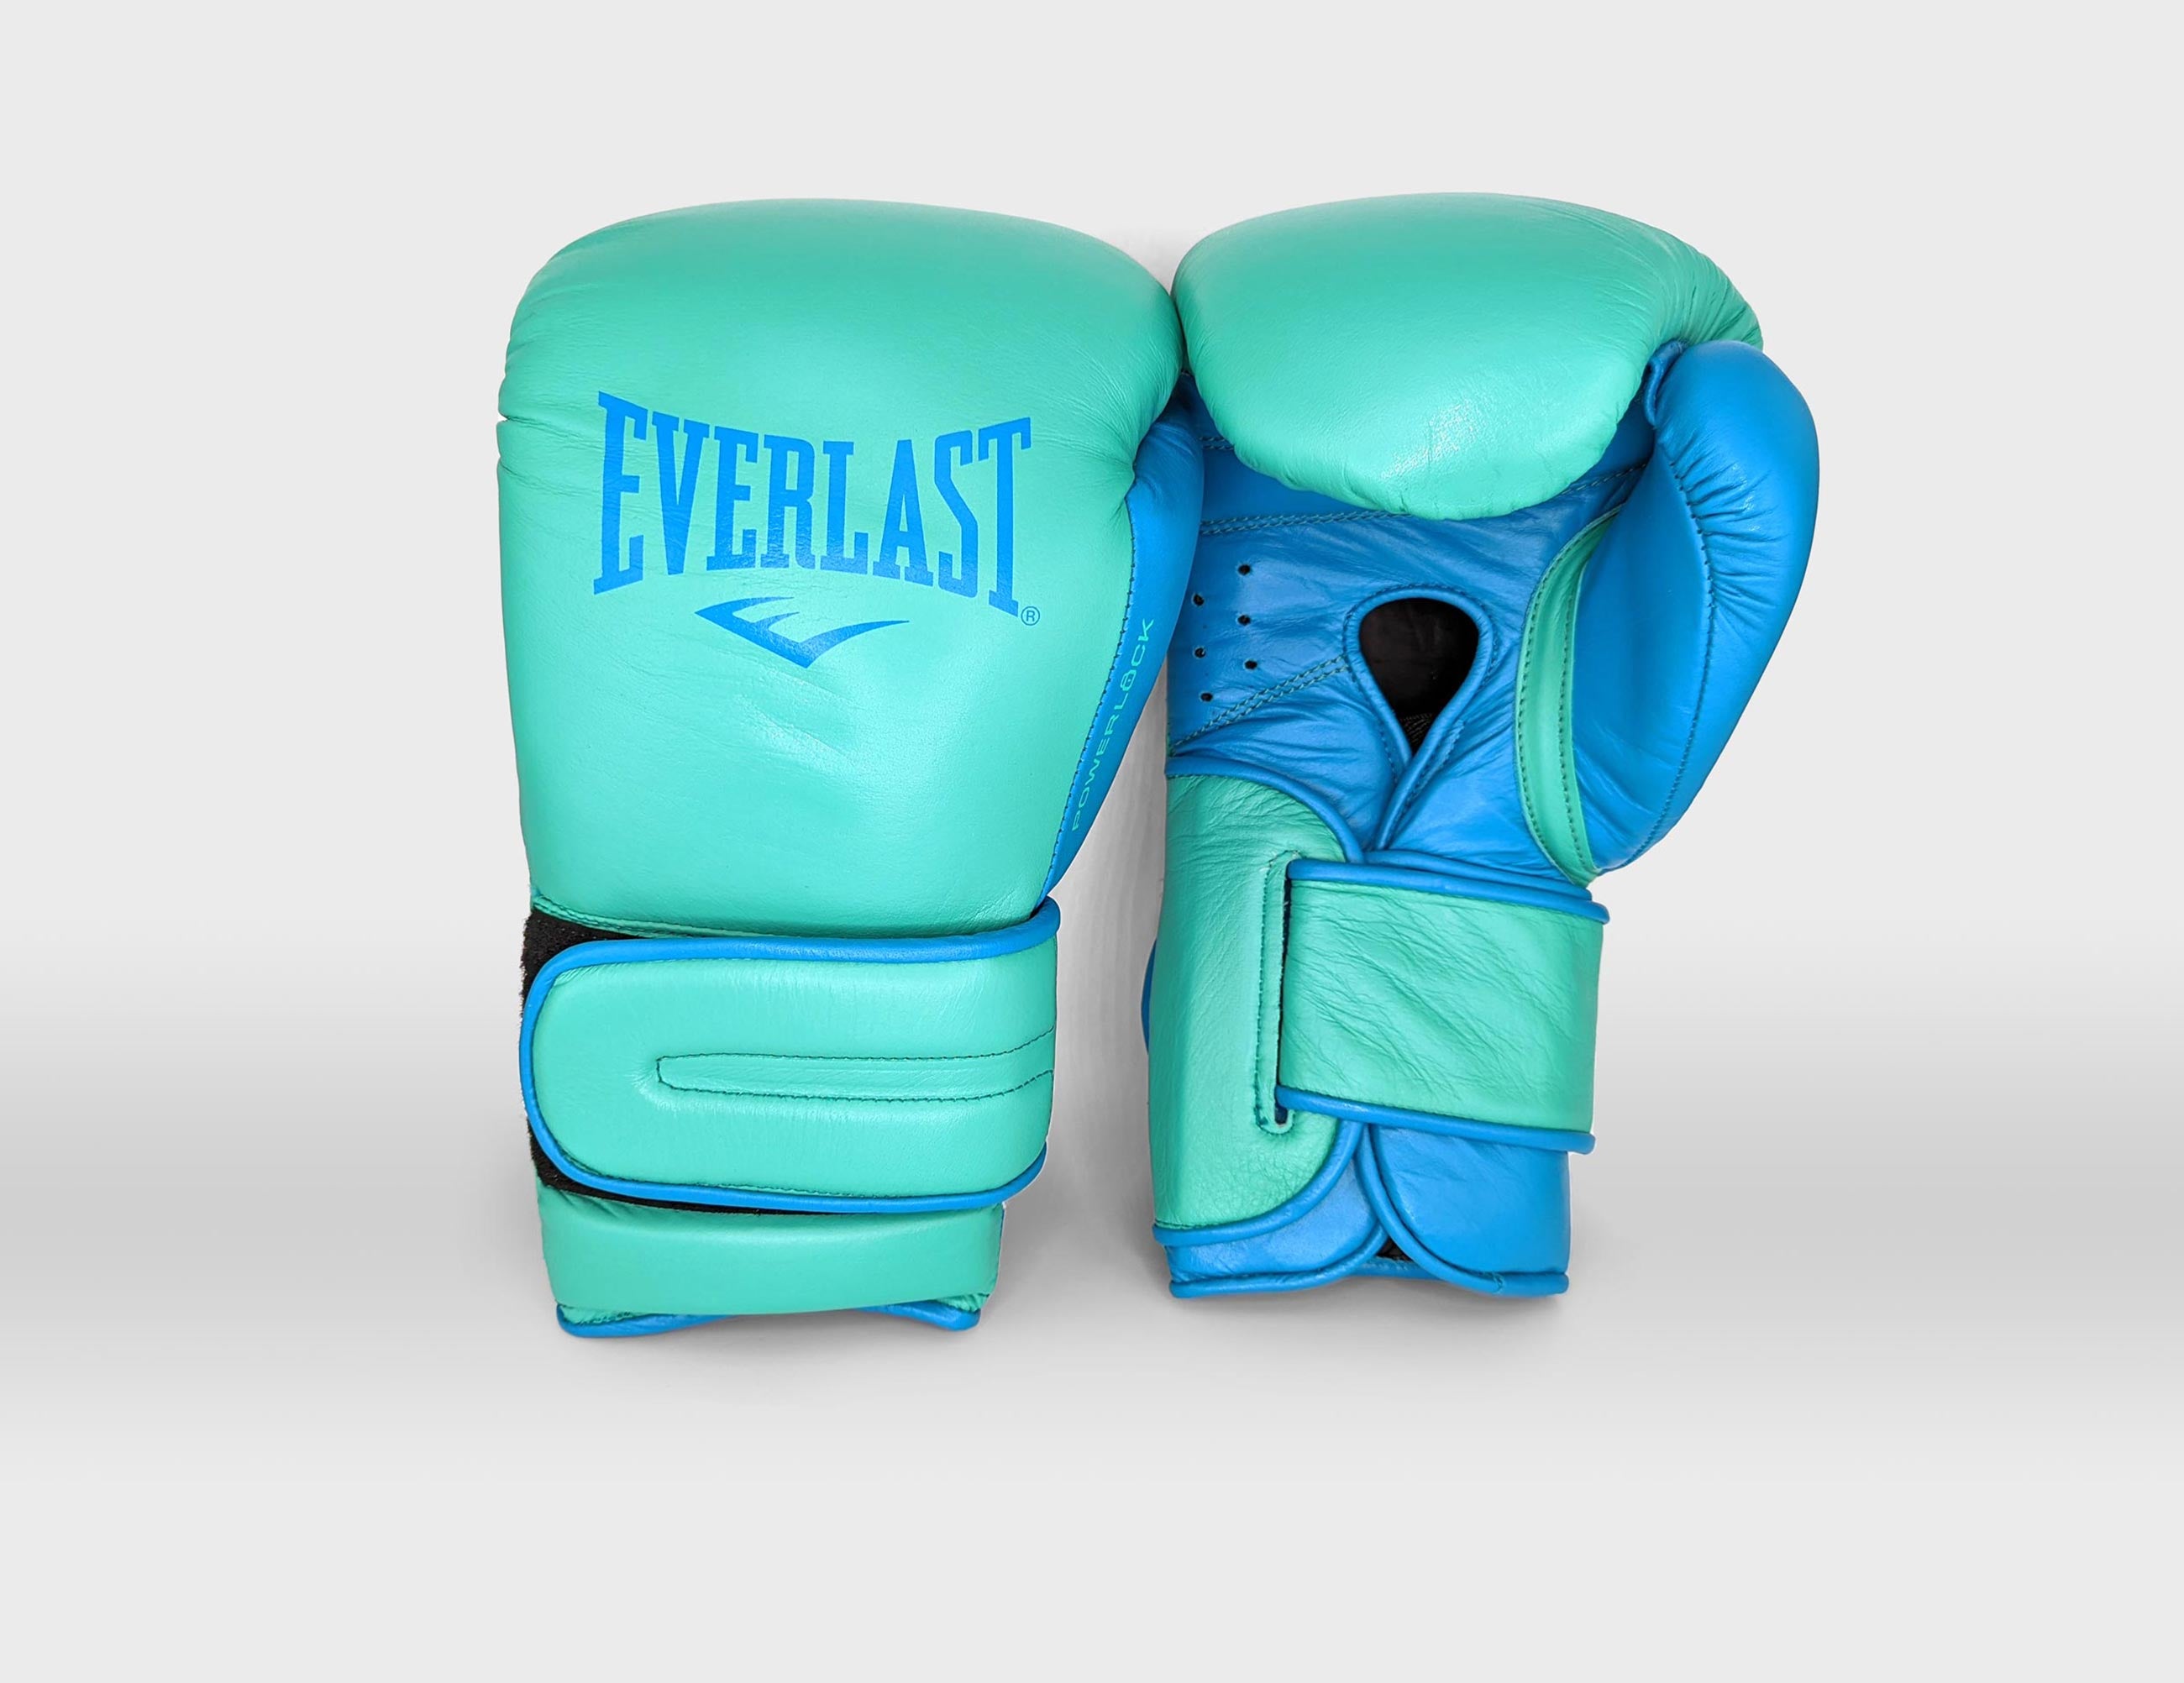 Product image of Everlast Powerlock2 Pro Boxing Gloves available at ATL Fight Shop. Shop online or in-store at our Roswell, GA location.